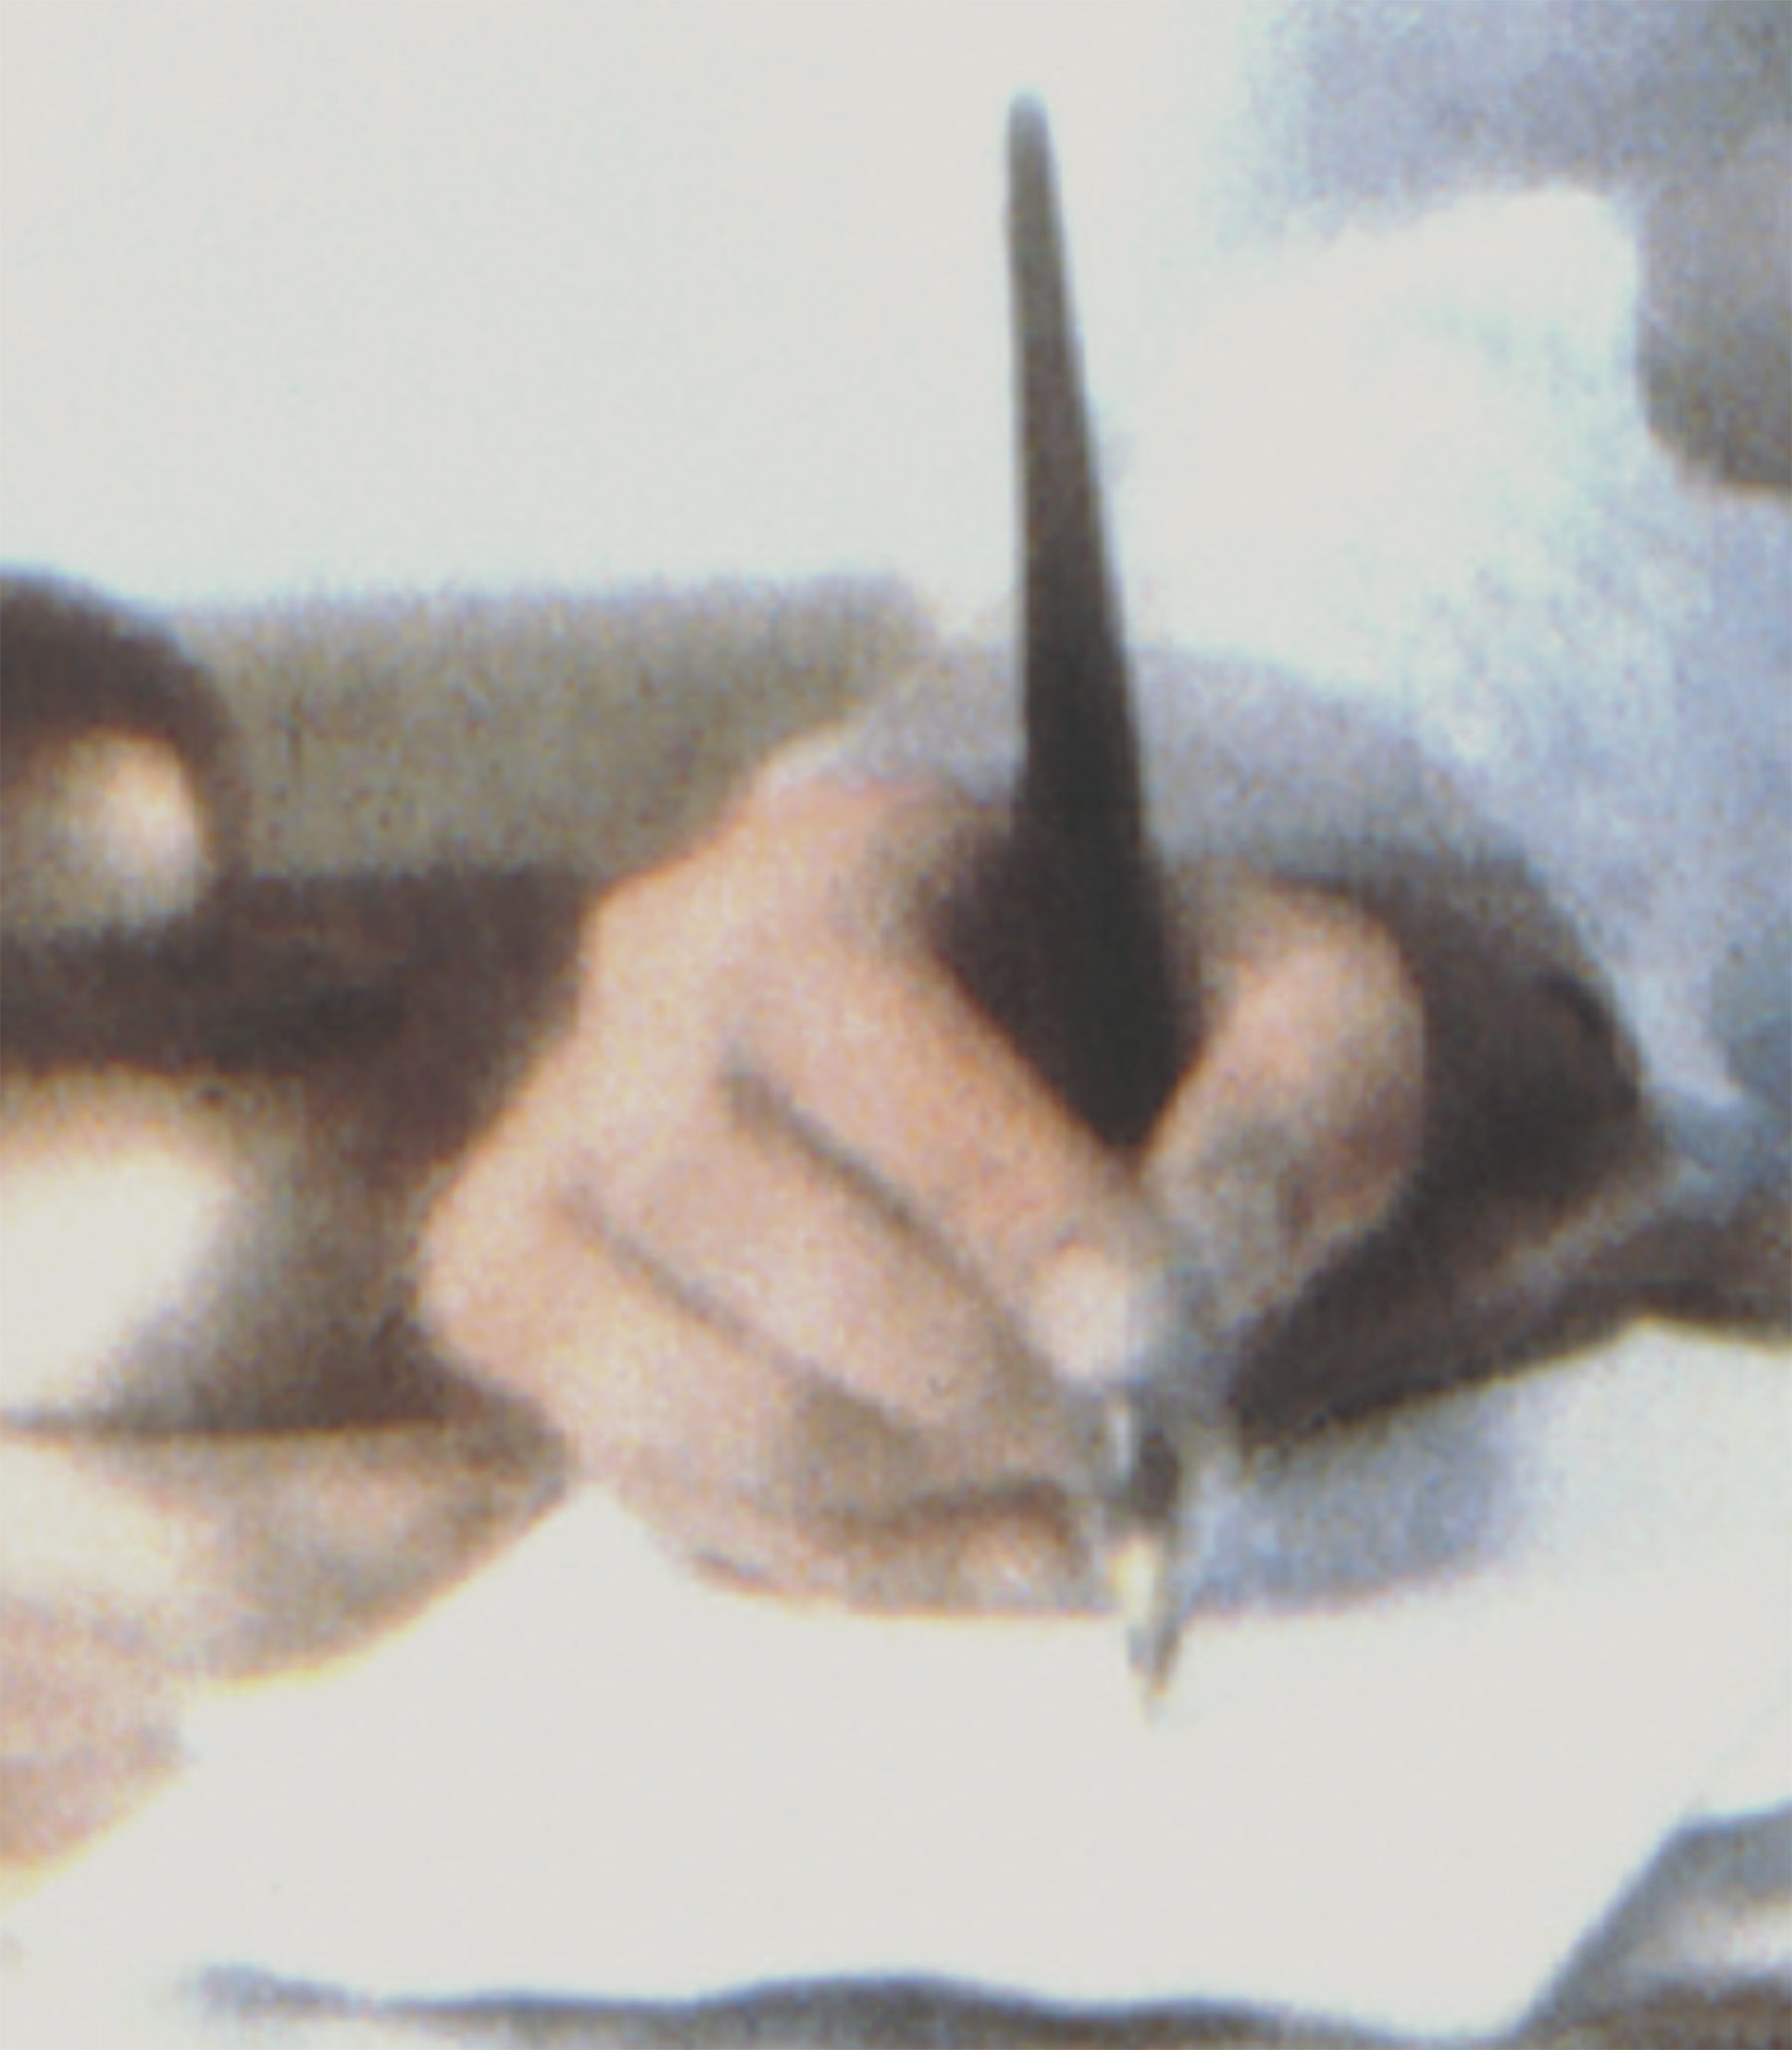 lose-up of Montgomery’s hand holding a wooden pen, inkwell to the left